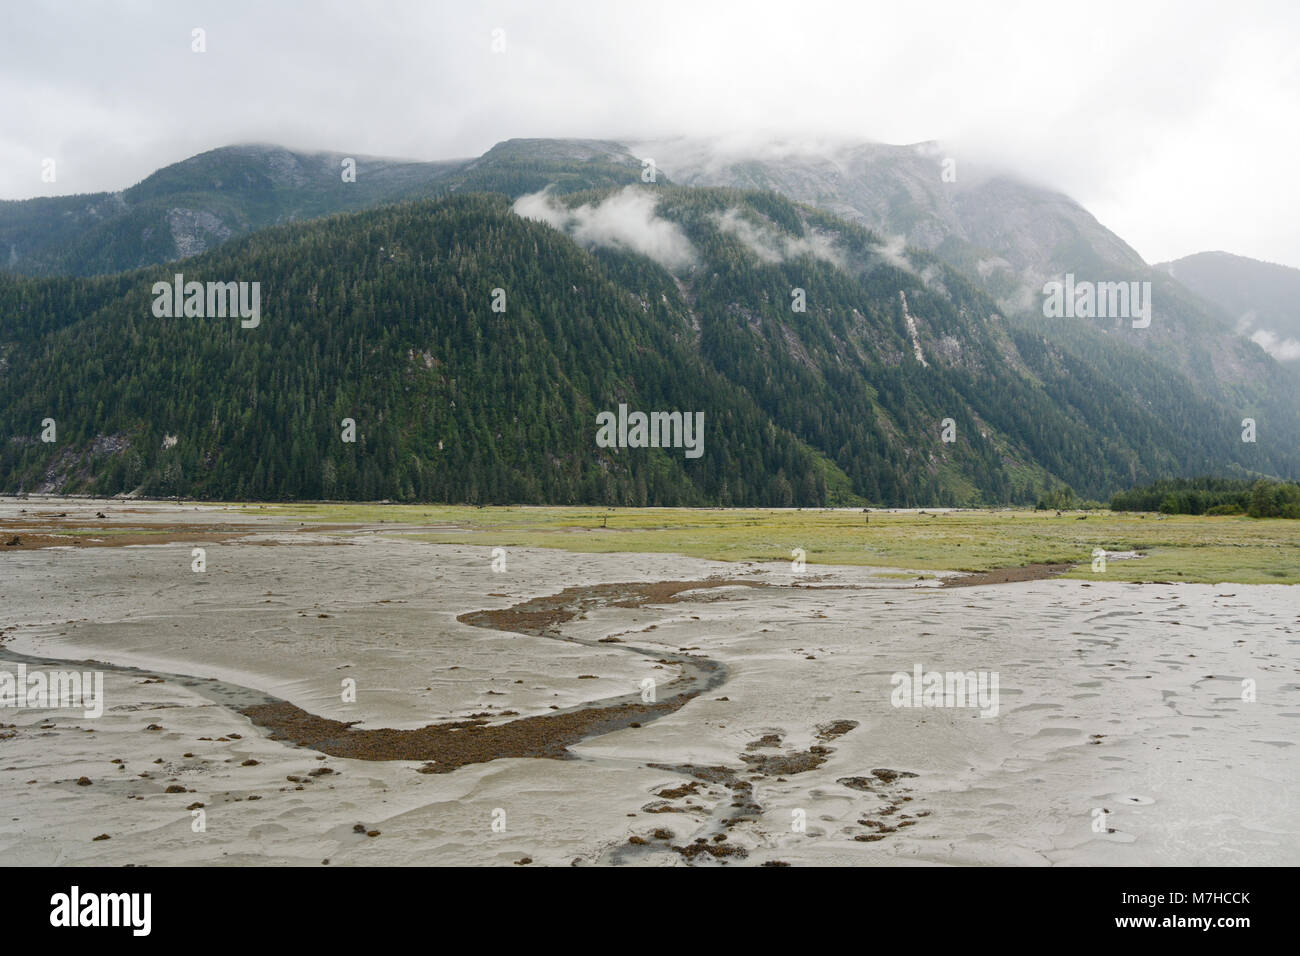 Low tide and tidal flats at the head of the Portland Canal separating Canada and the United States, at Hyder, Alaska and Stewart, British Columbia. Stock Photo